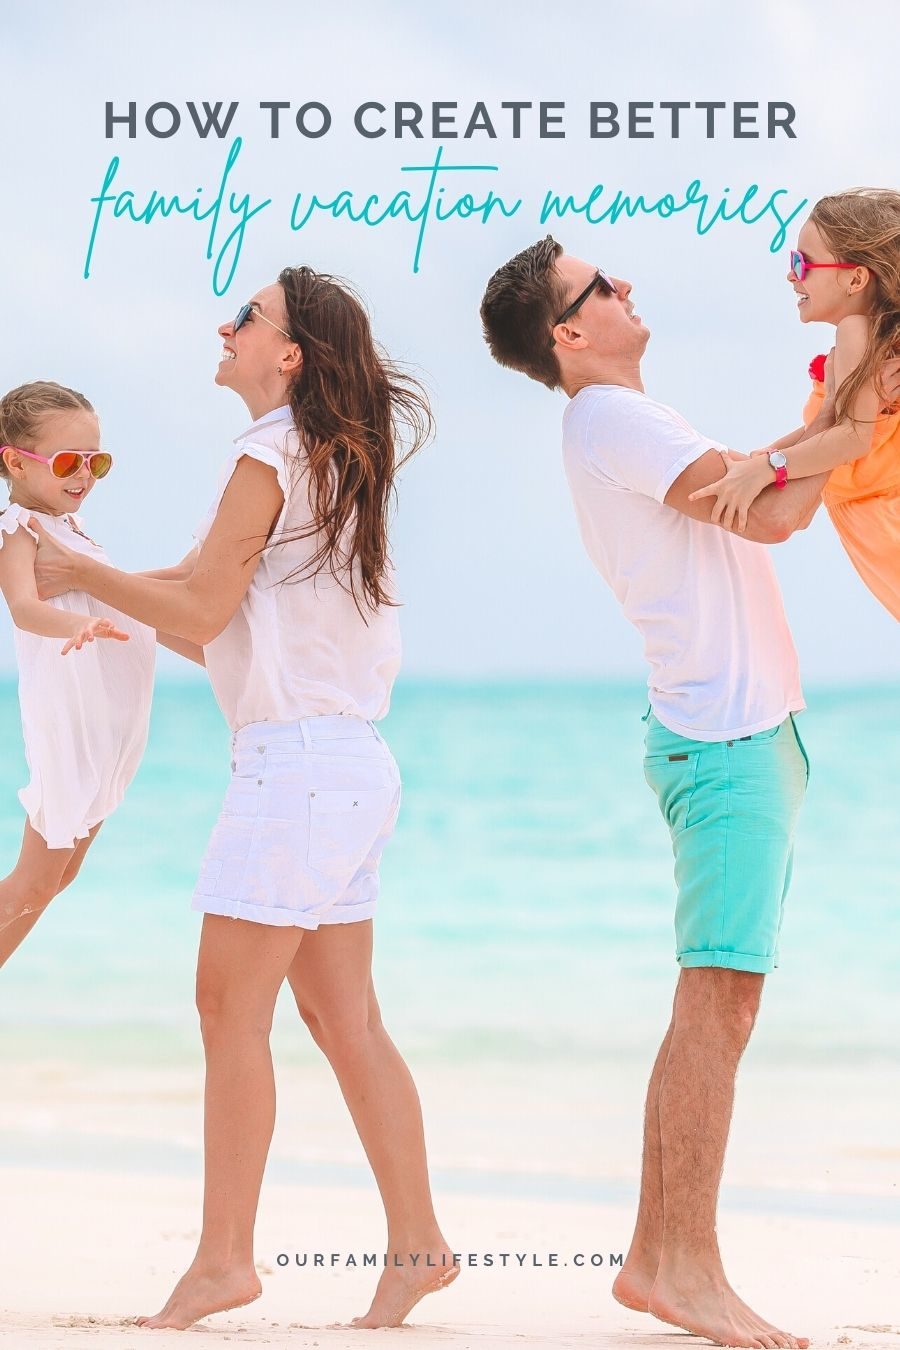 How To Create Better Family Vacation Memories